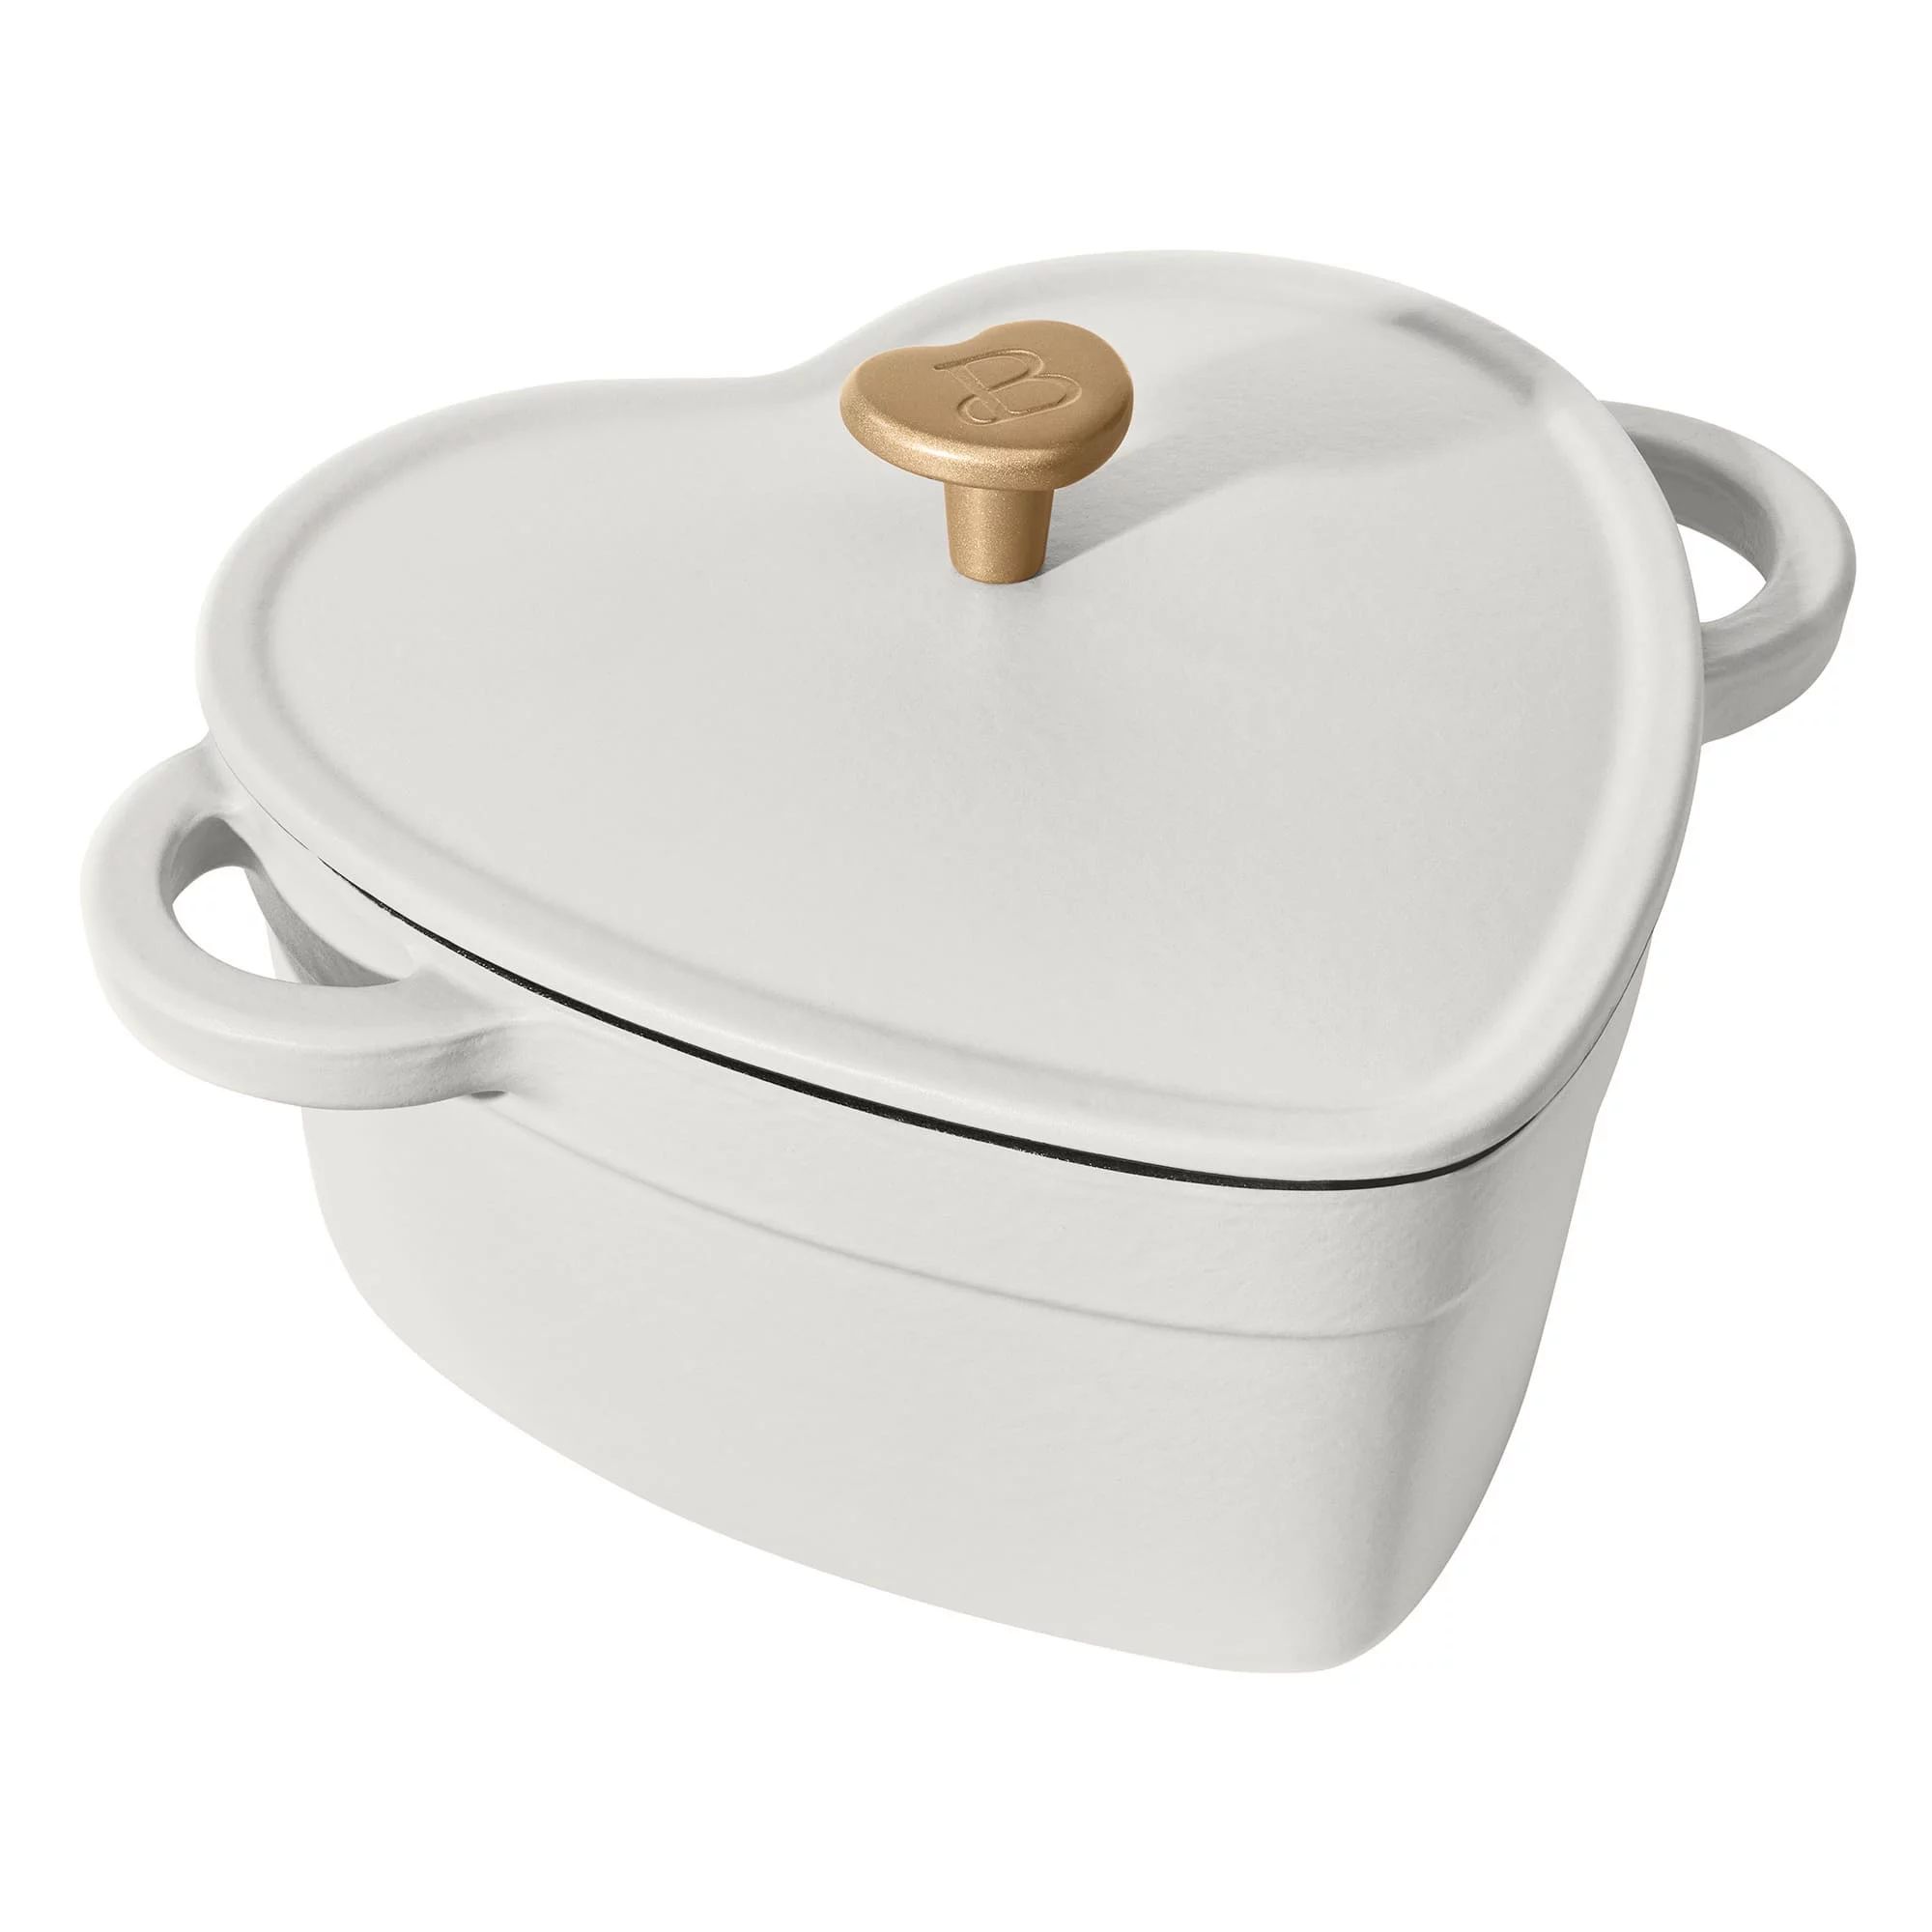 Beautiful 2QT Cast Iron Heart Shaped Dutch Oven, White Icing by Drew Barrymore | Walmart (US)